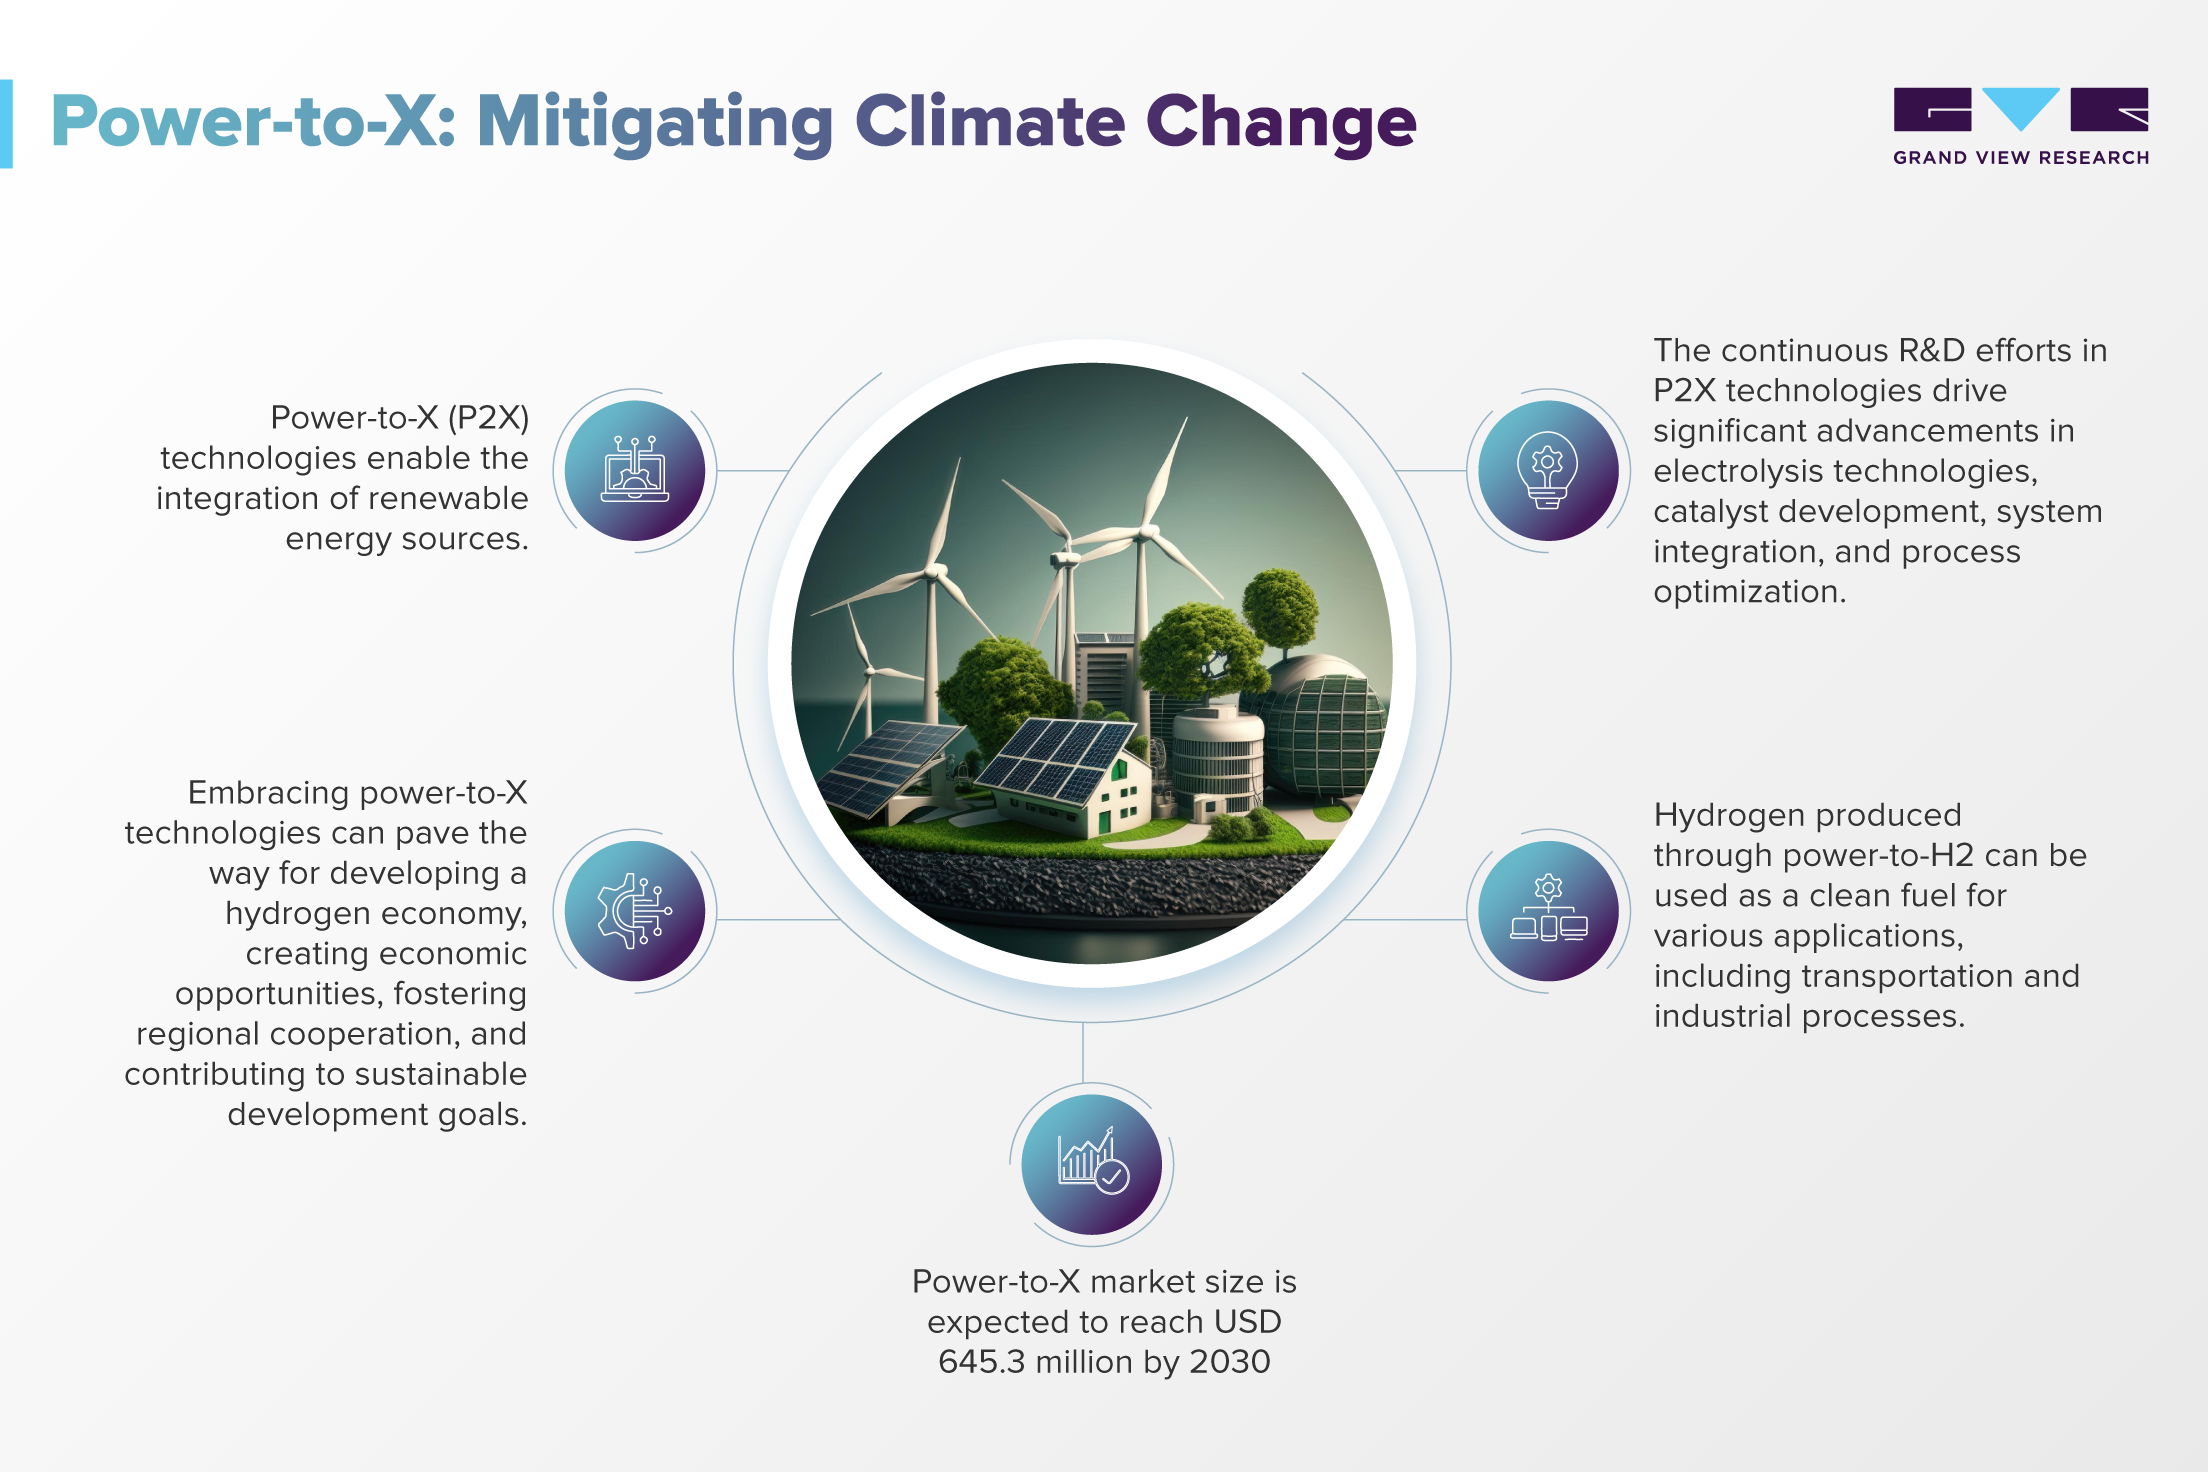 Power-to-x: Mitigating Climate Change